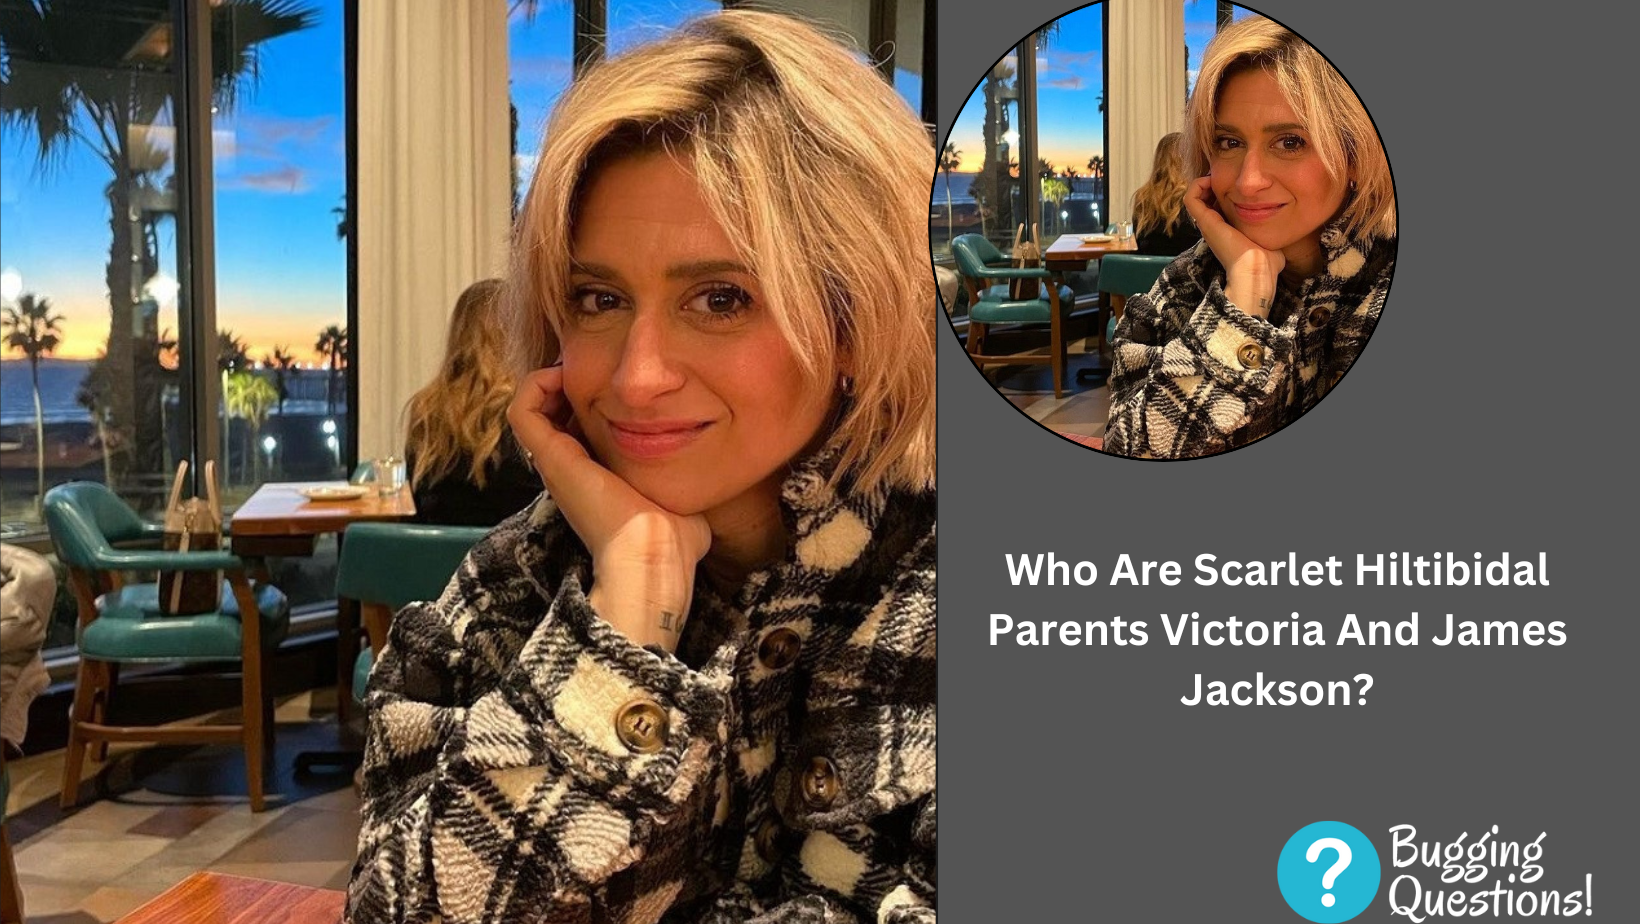 Who Are Scarlet Hiltibidal Parents Victoria And James Jackson?